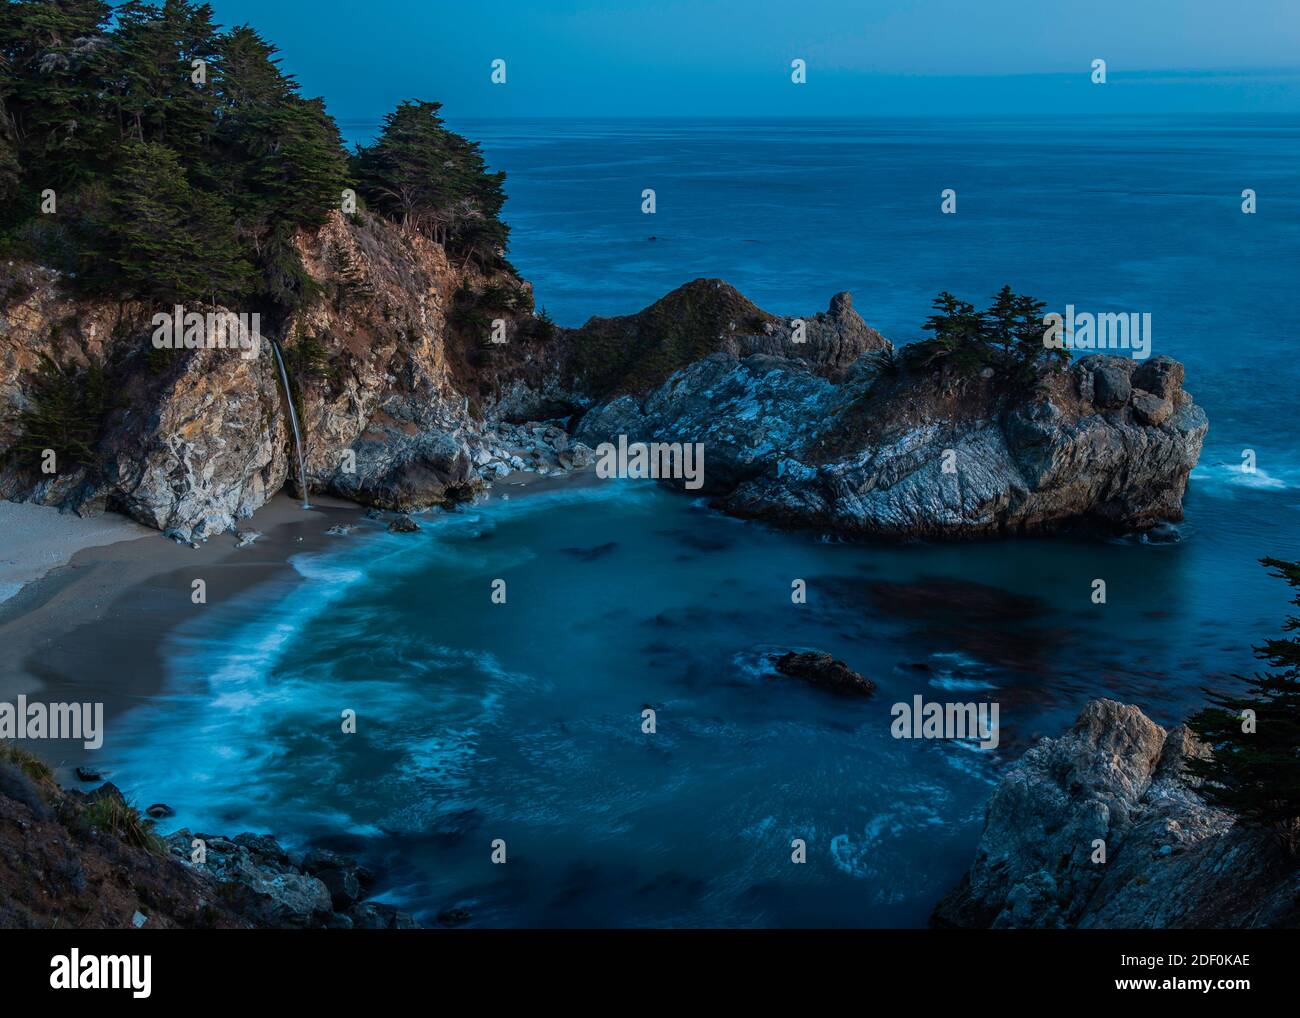 McWay Falls on the California coast at blue hour Stock Photo